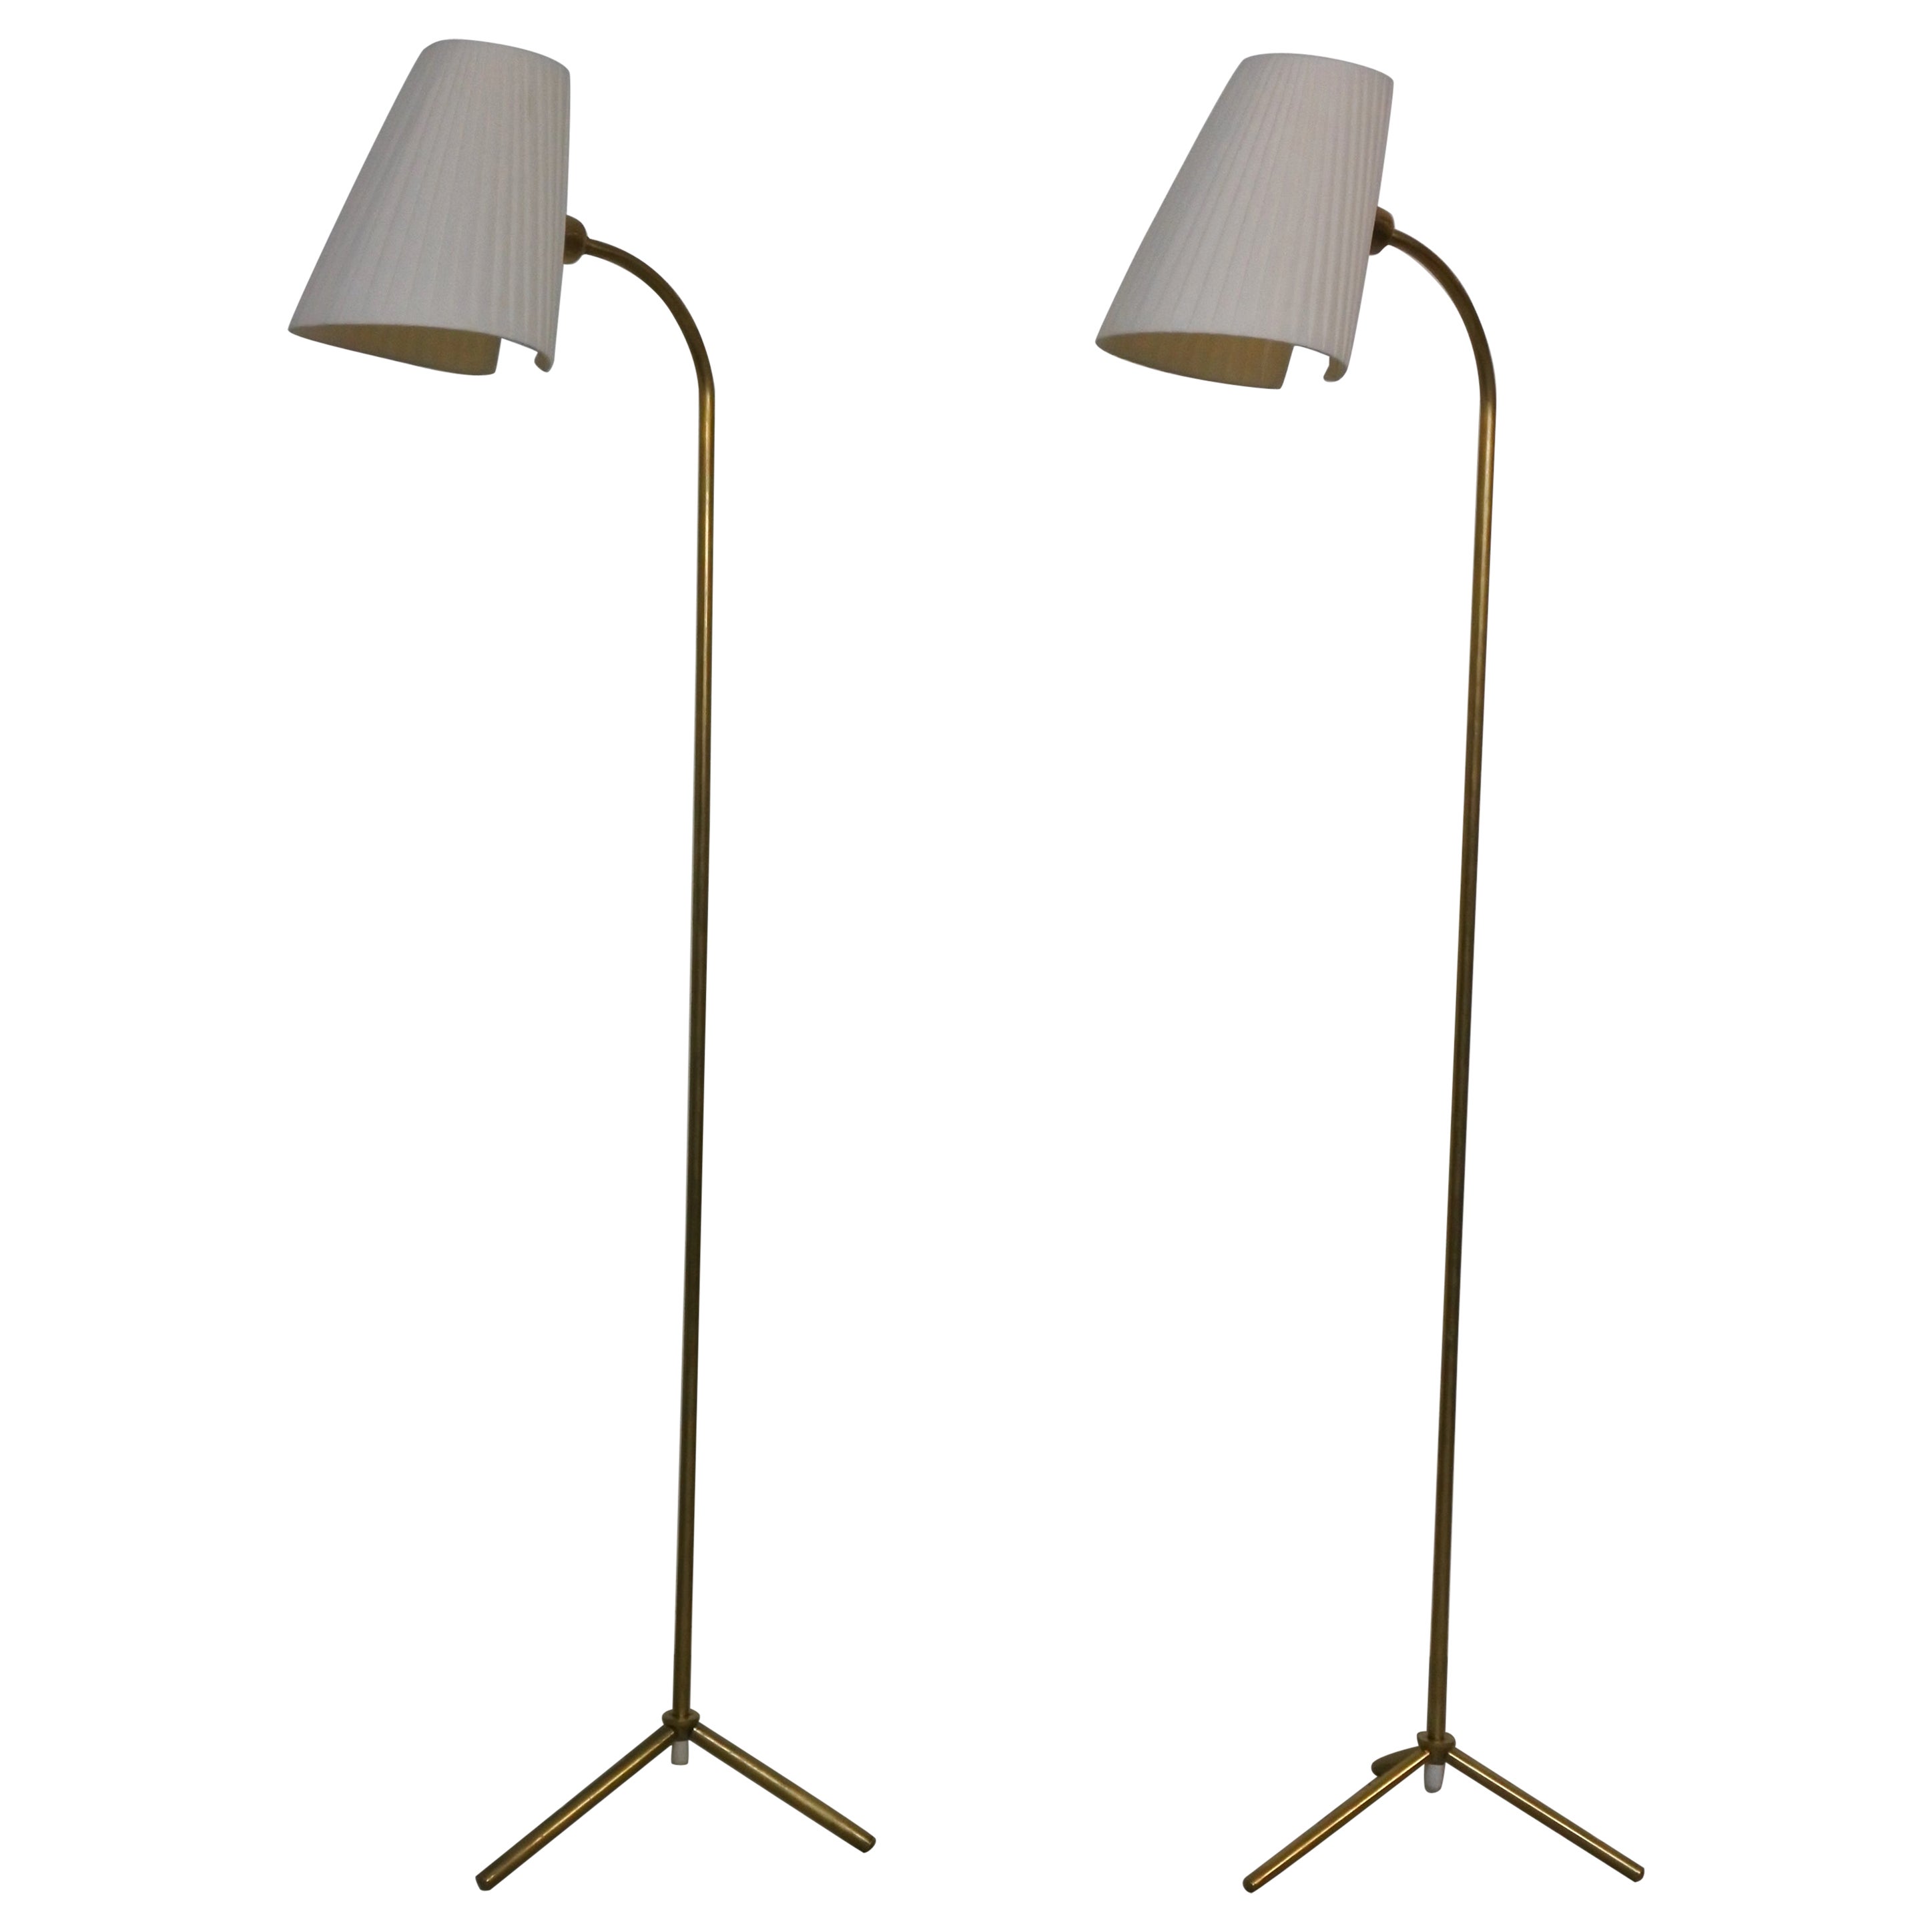 Tripod Floor Lamps in Brass by Lisa Johansson-Pape & Orno, Finland 1950s